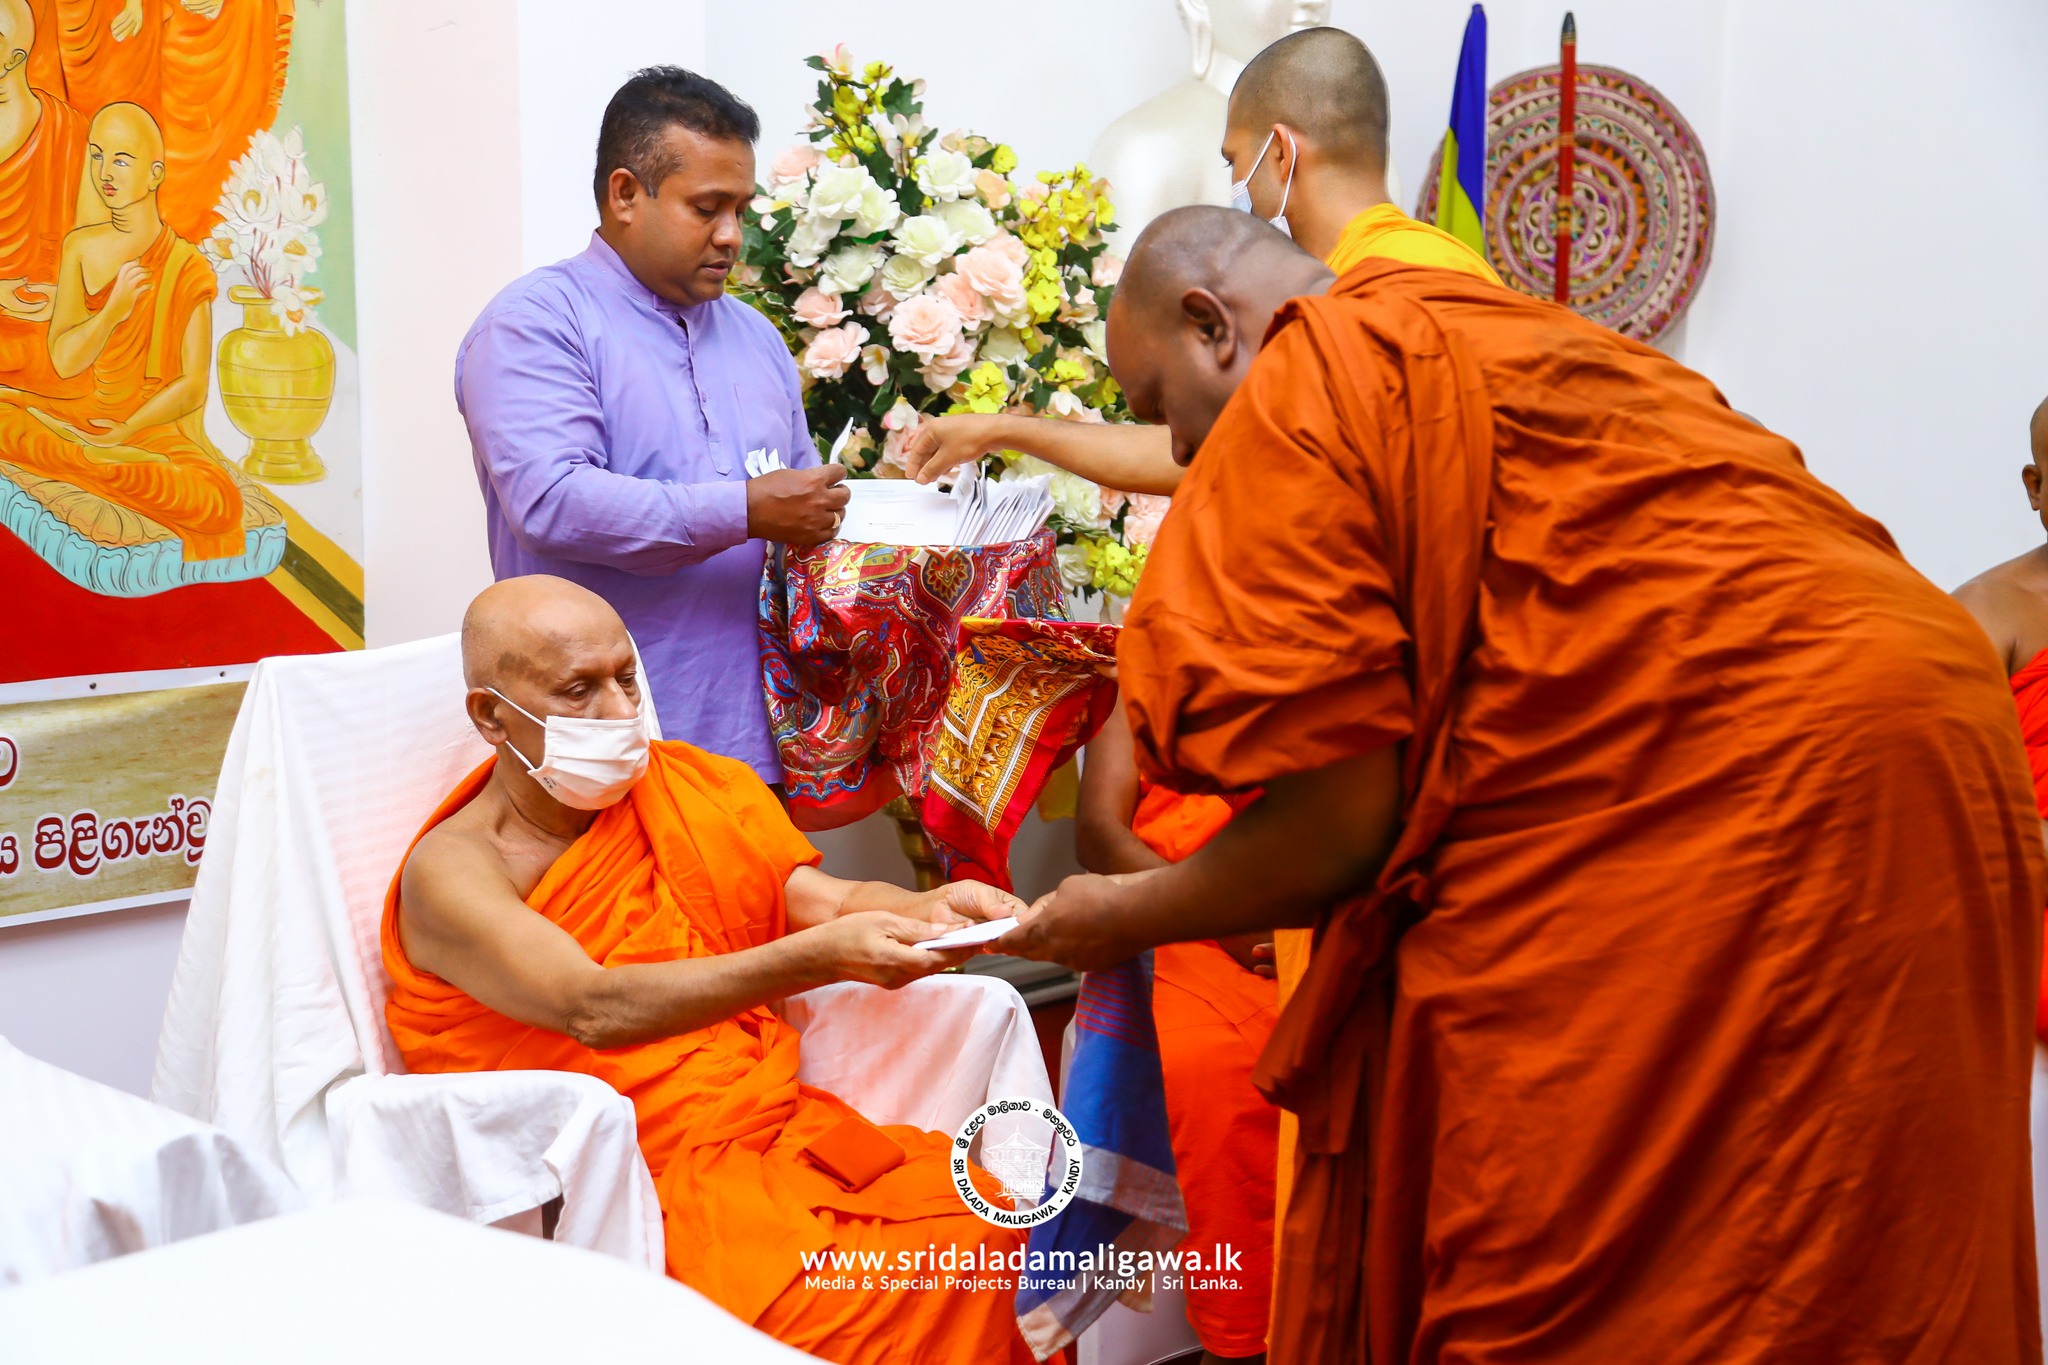 Present Financial Aid to 50 Temples Located in Different Parts of the Island 04